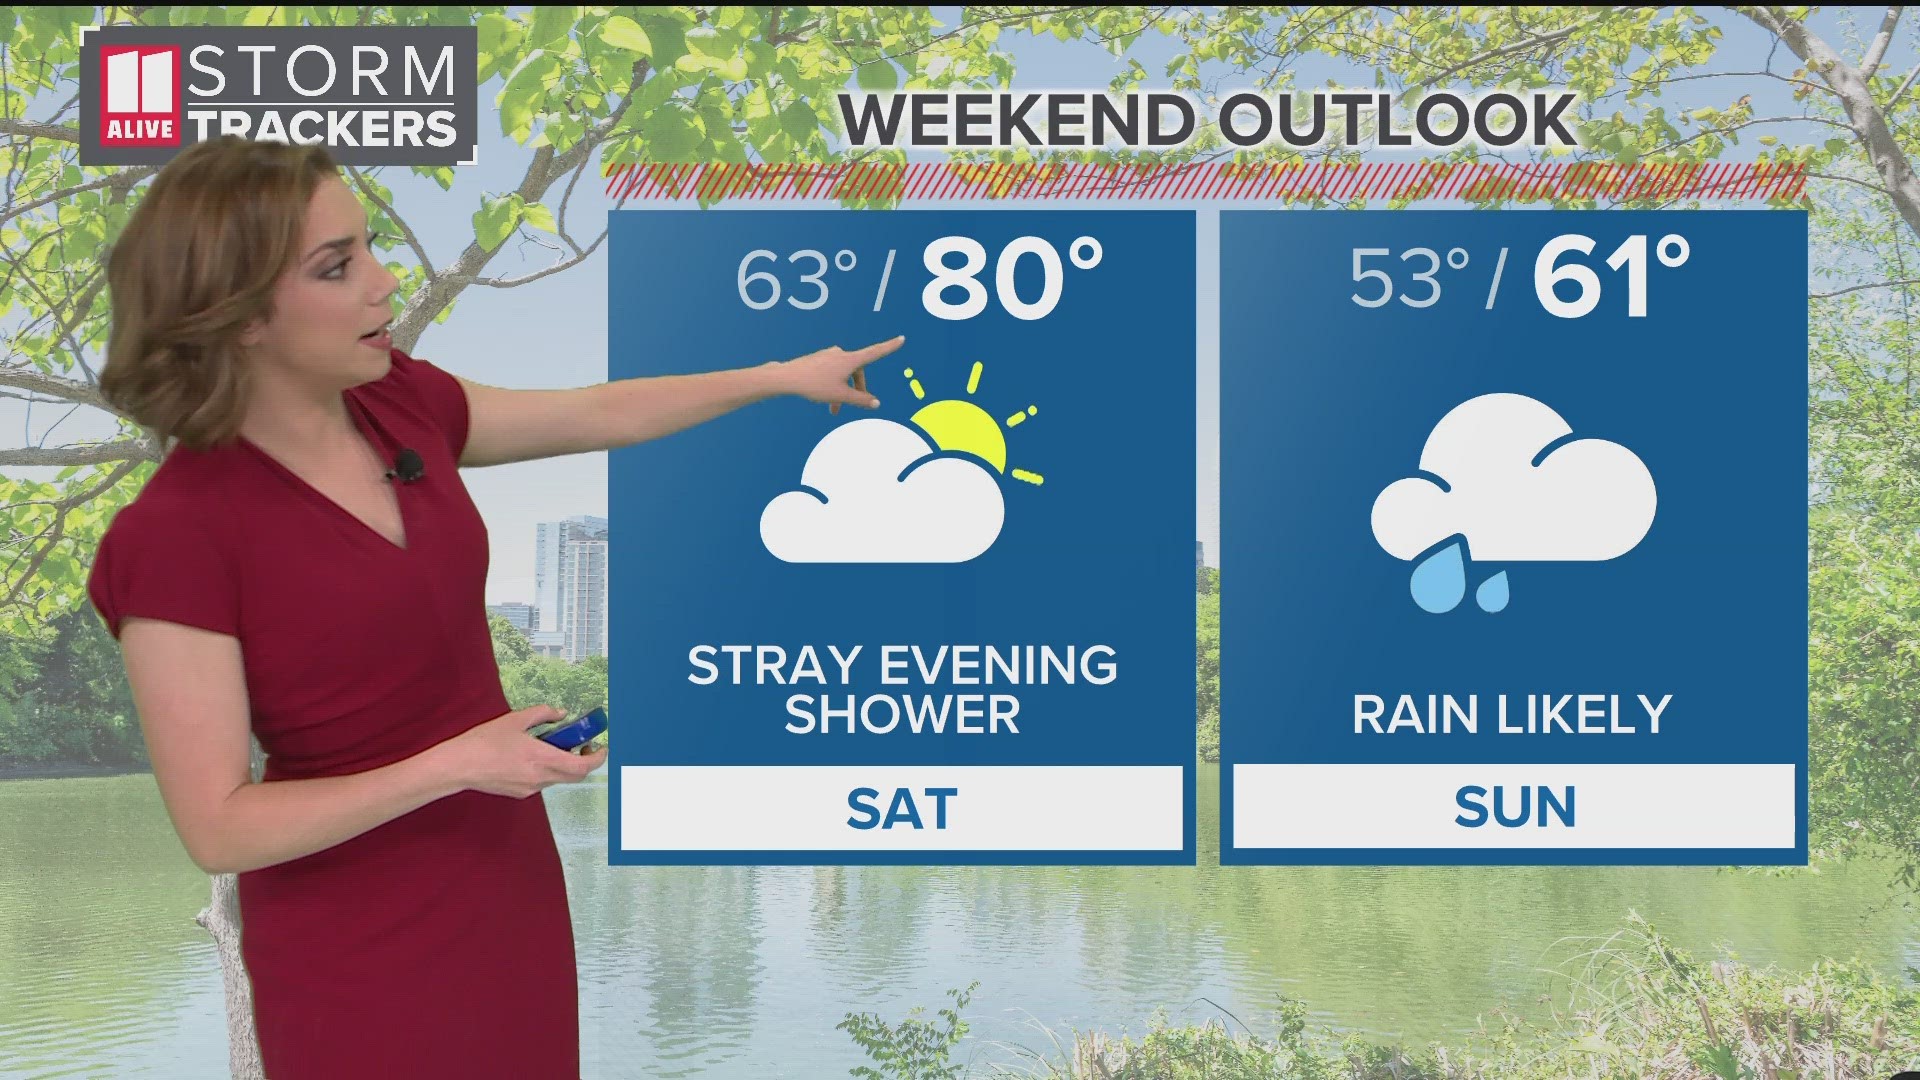 The weekend starts dry, but rain moves back in Sunday